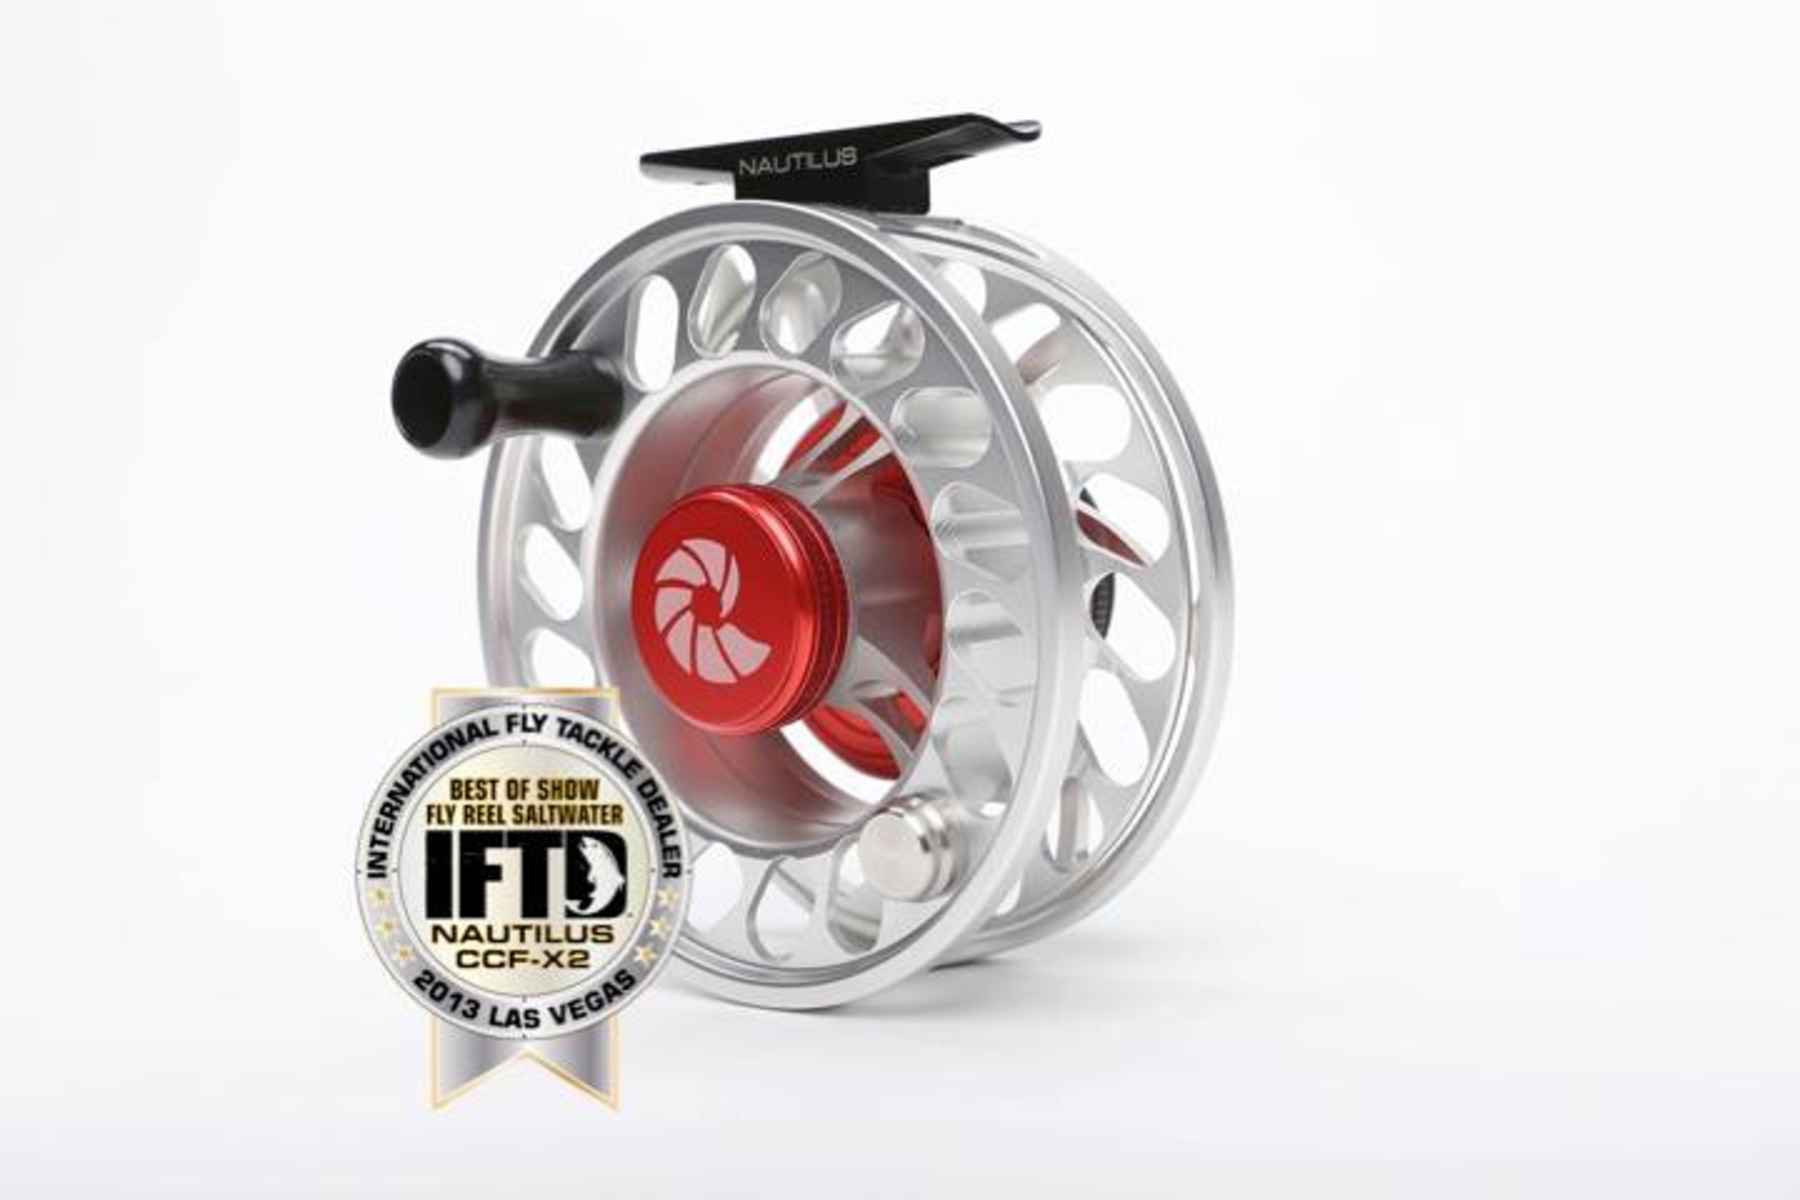 Nautilus Intros Award Winning CCF-X2 Reel, Expected by December